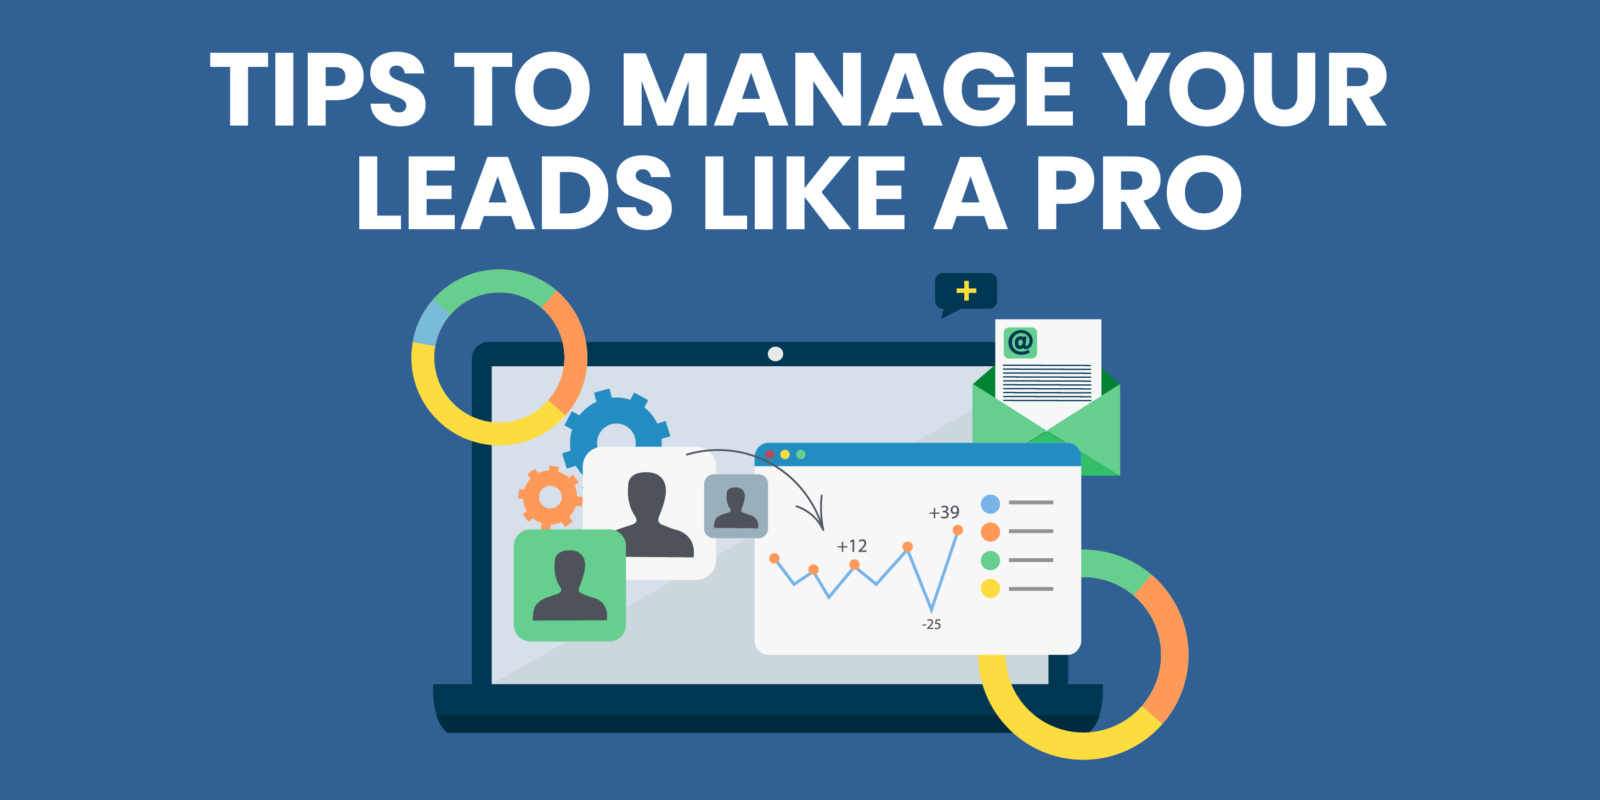 Tips to manage your leads like a pro﻿